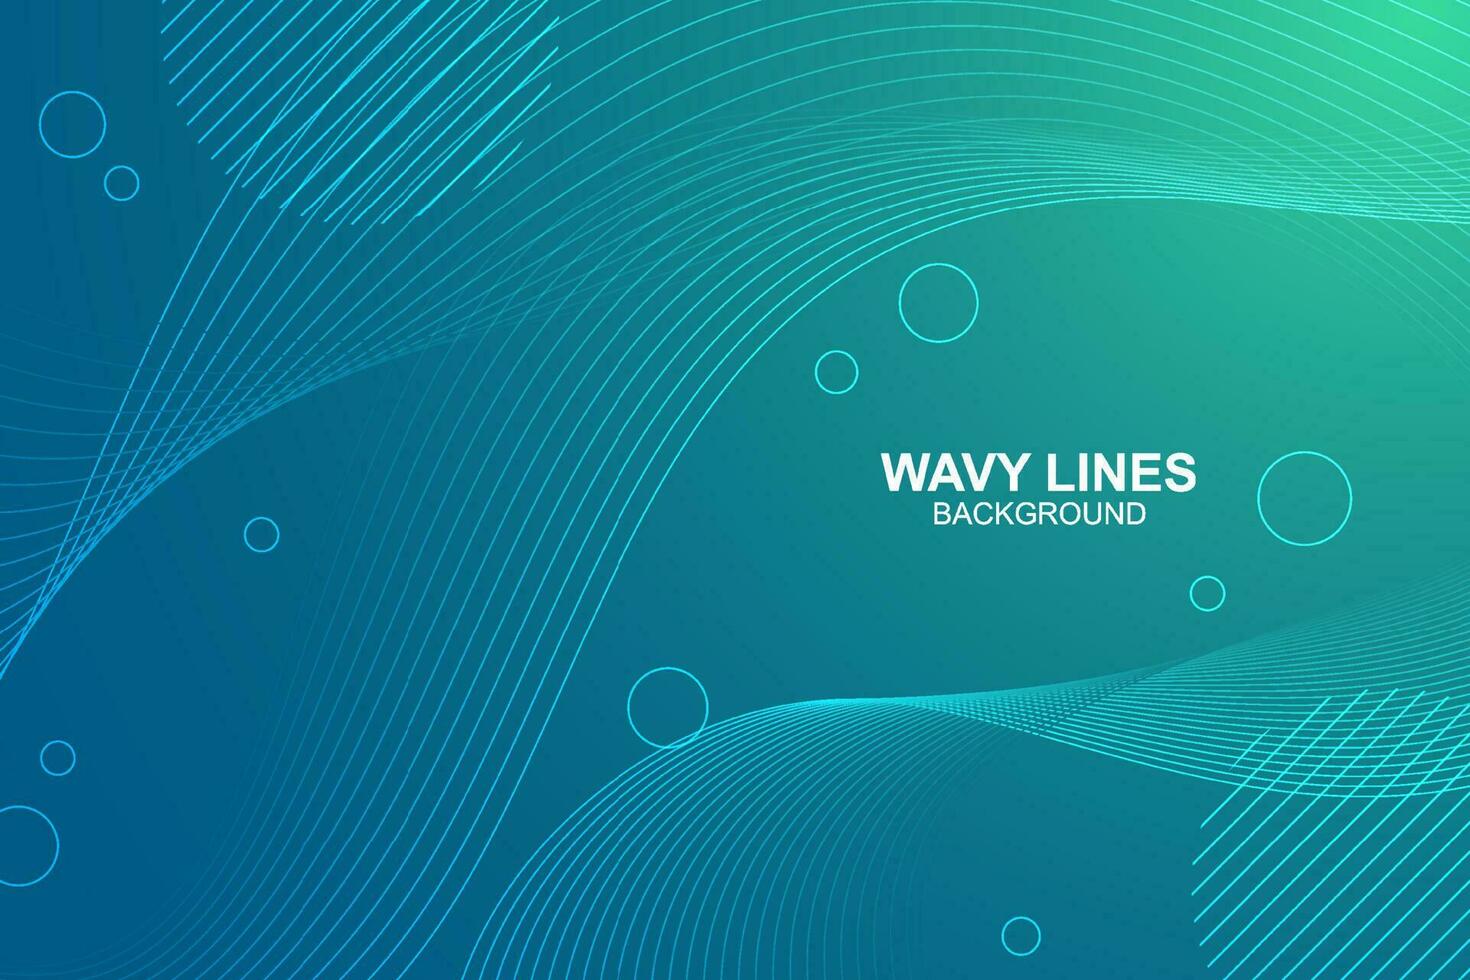 Abstract wavy lines on gradient background vector